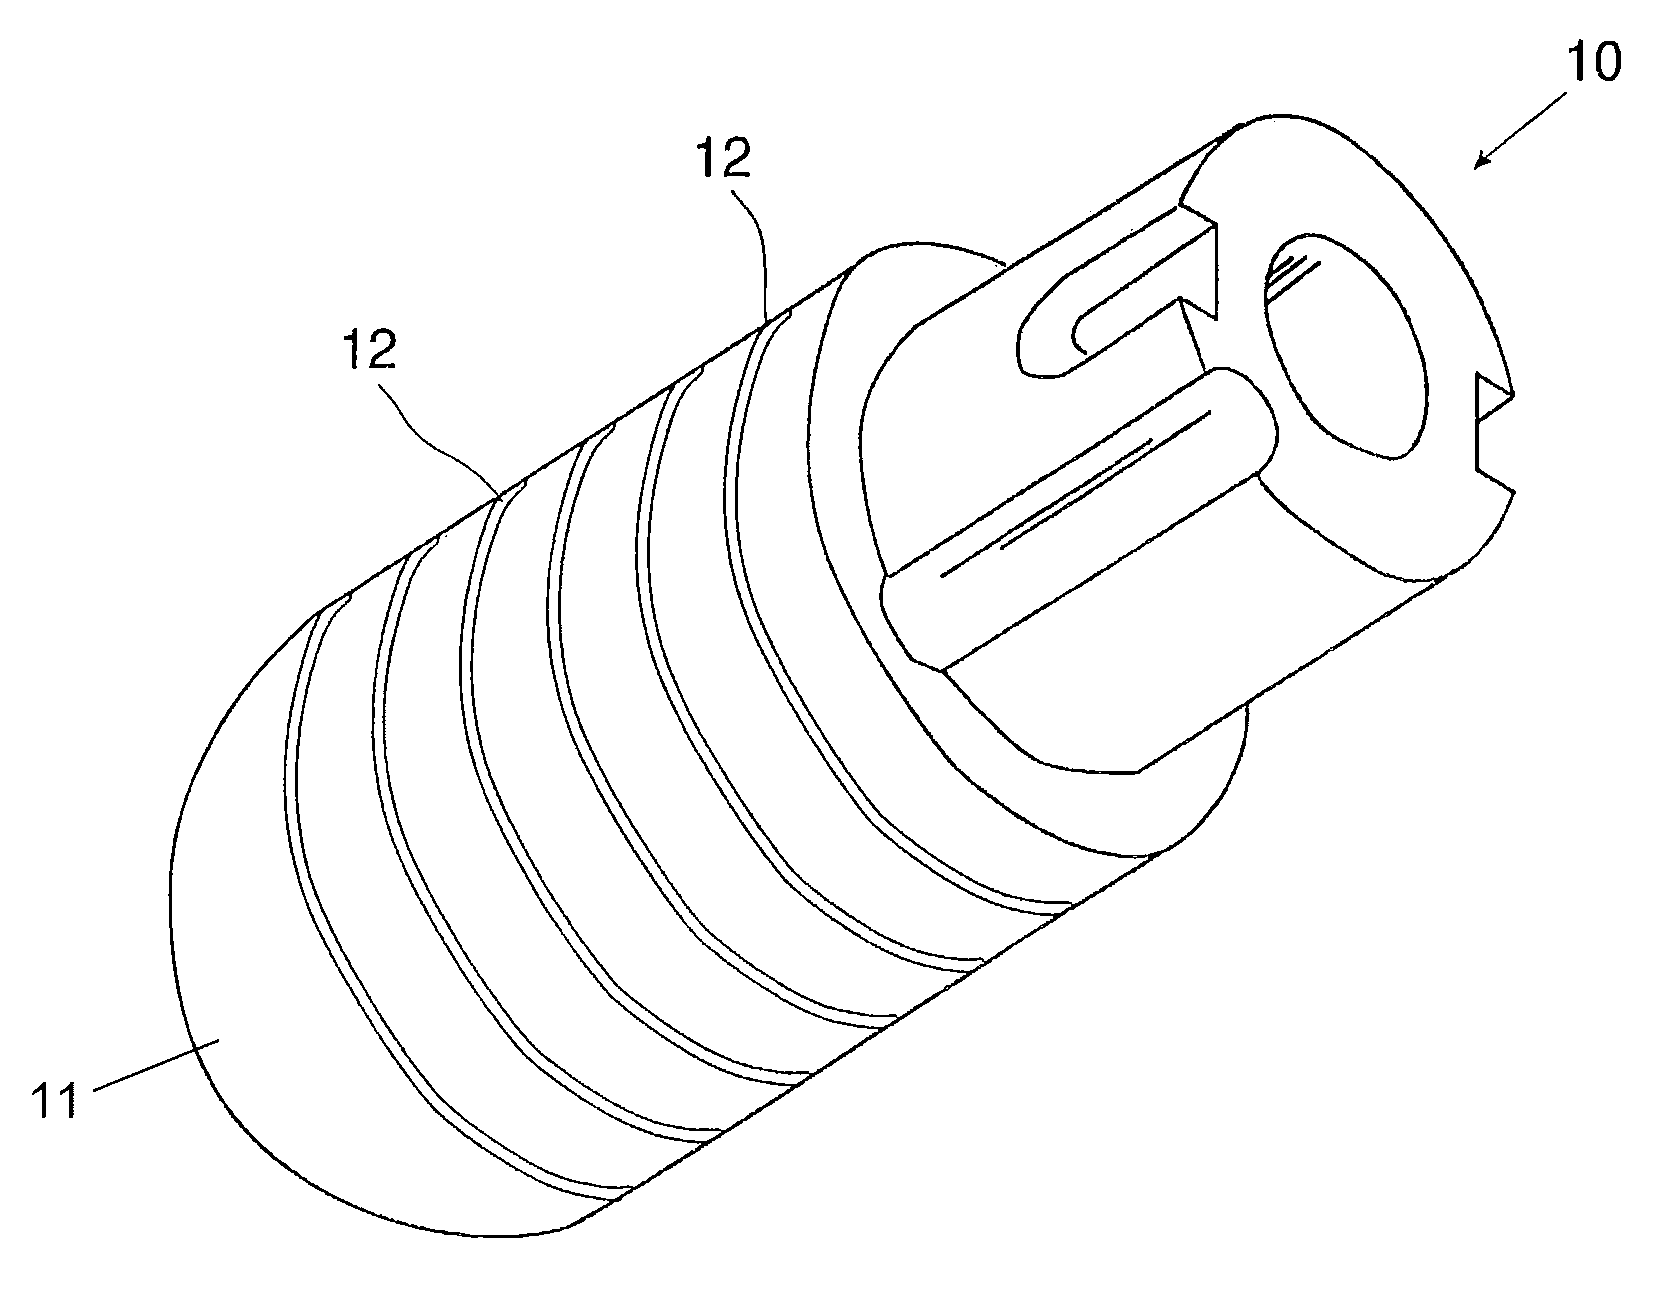 Ablation catheter with flexible tip and methods of making the same